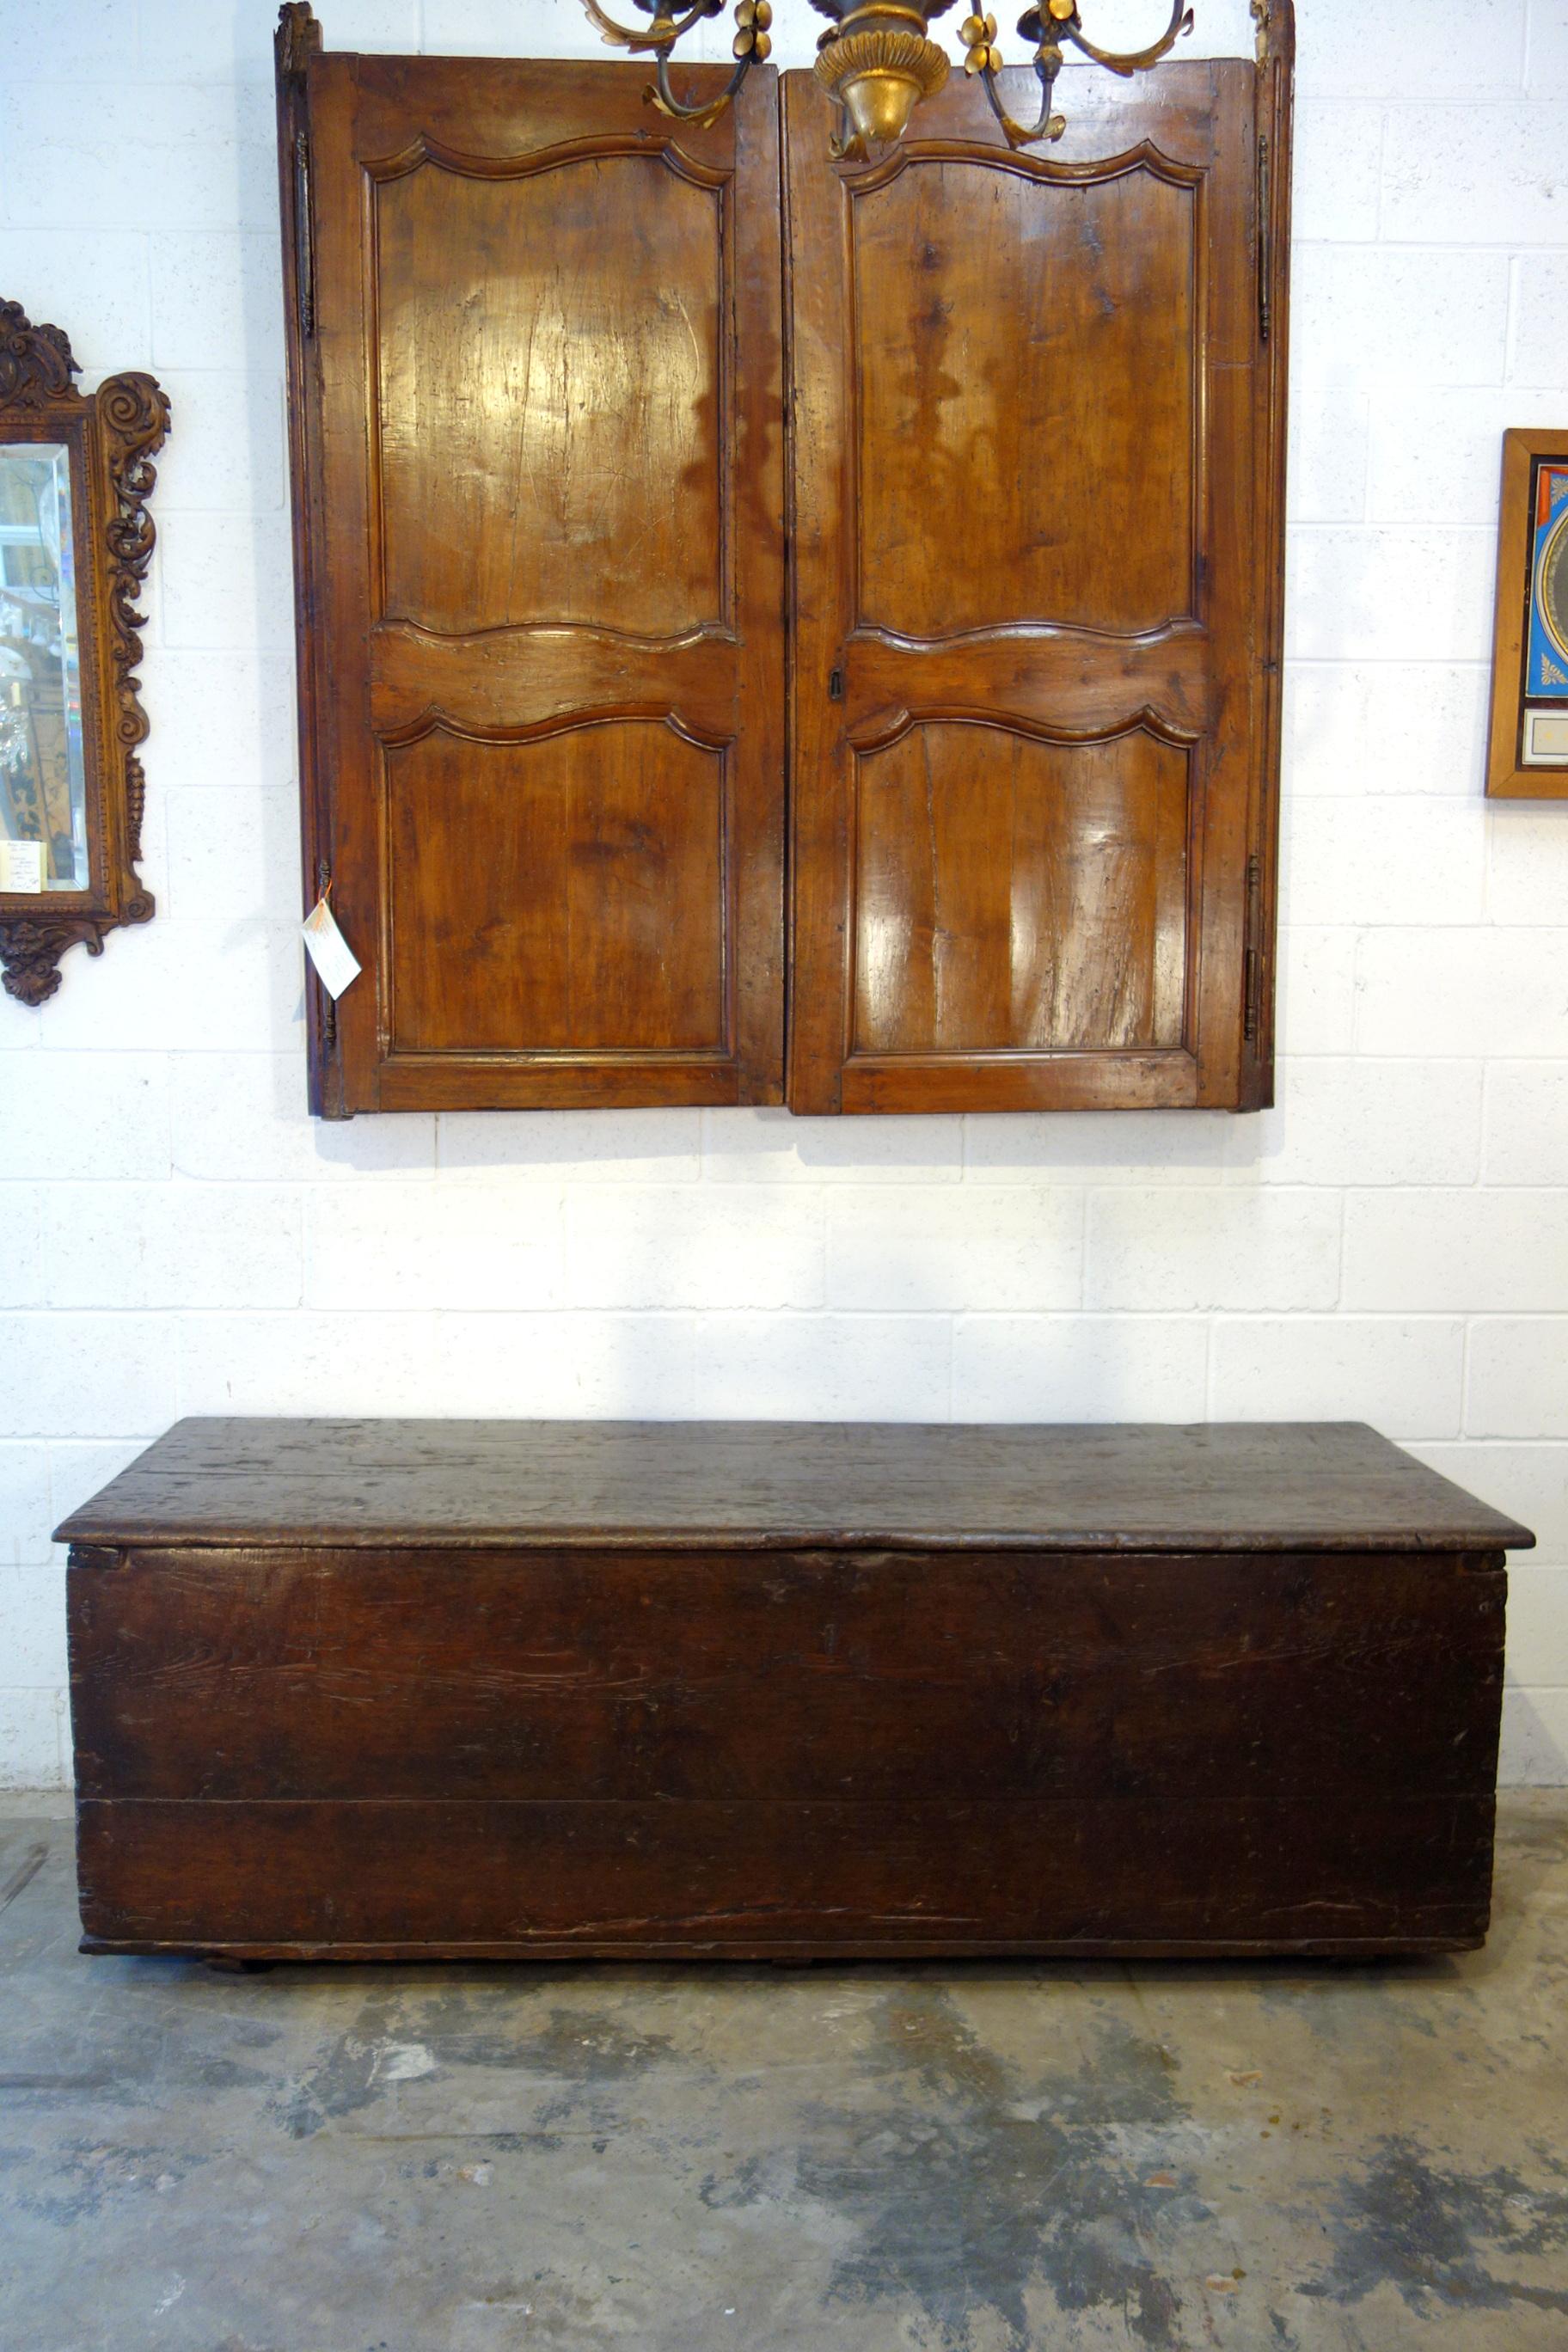 Stately and large, this antique 17th Century Italian bridal trunk was handcrafted of Italian native oak (Quercus frainetto) with hand-forged hardware. Rich, dark, well-preserved patina illustrates generations of fine aging and utility. Solid and